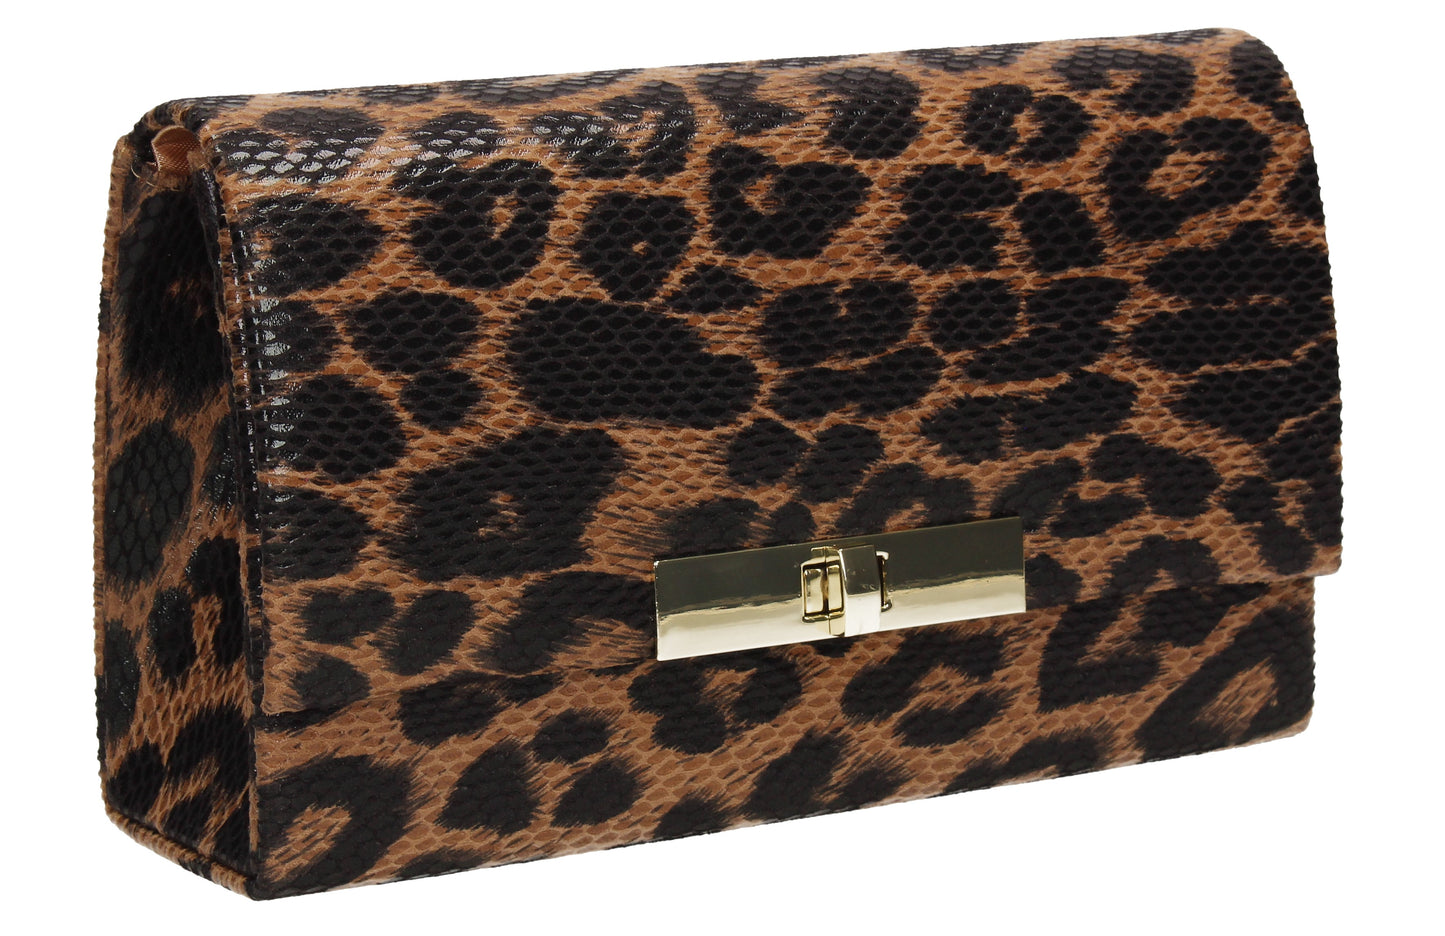 Tana Faux Leather Animal Style Clutch Bag Leopard Print